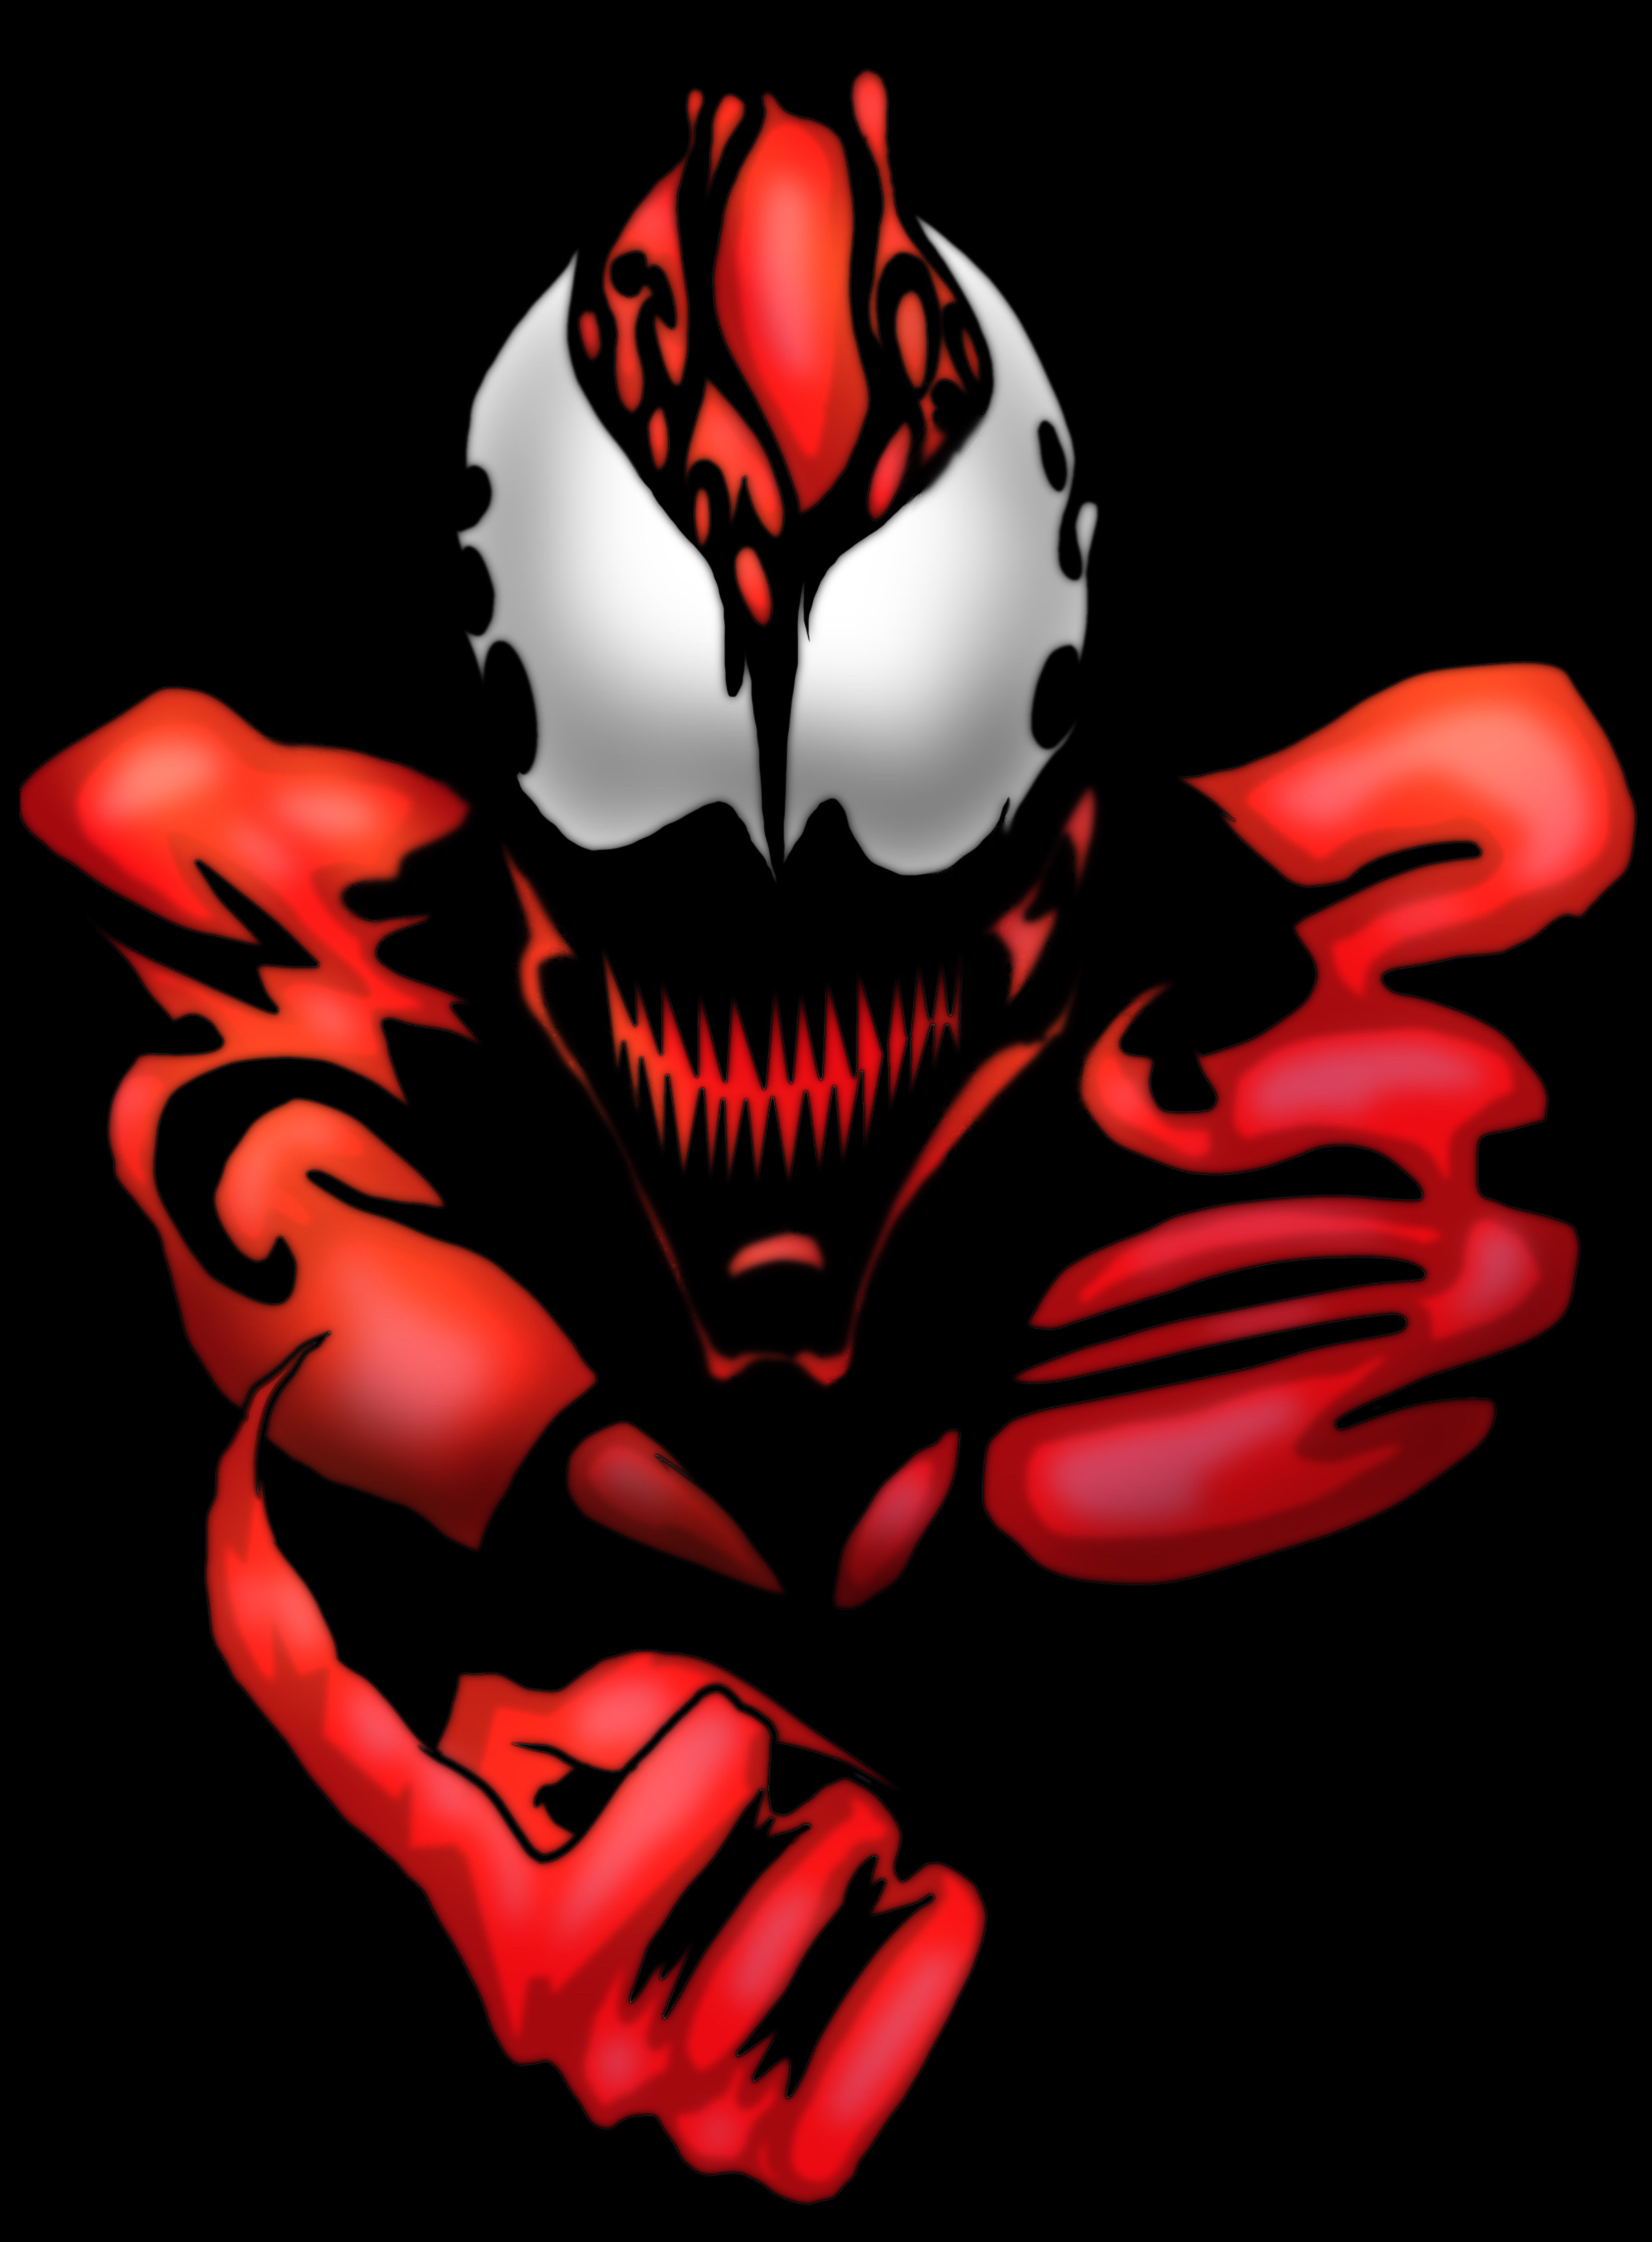 Carnage Is Here By Fantasticabstract On Deviantart